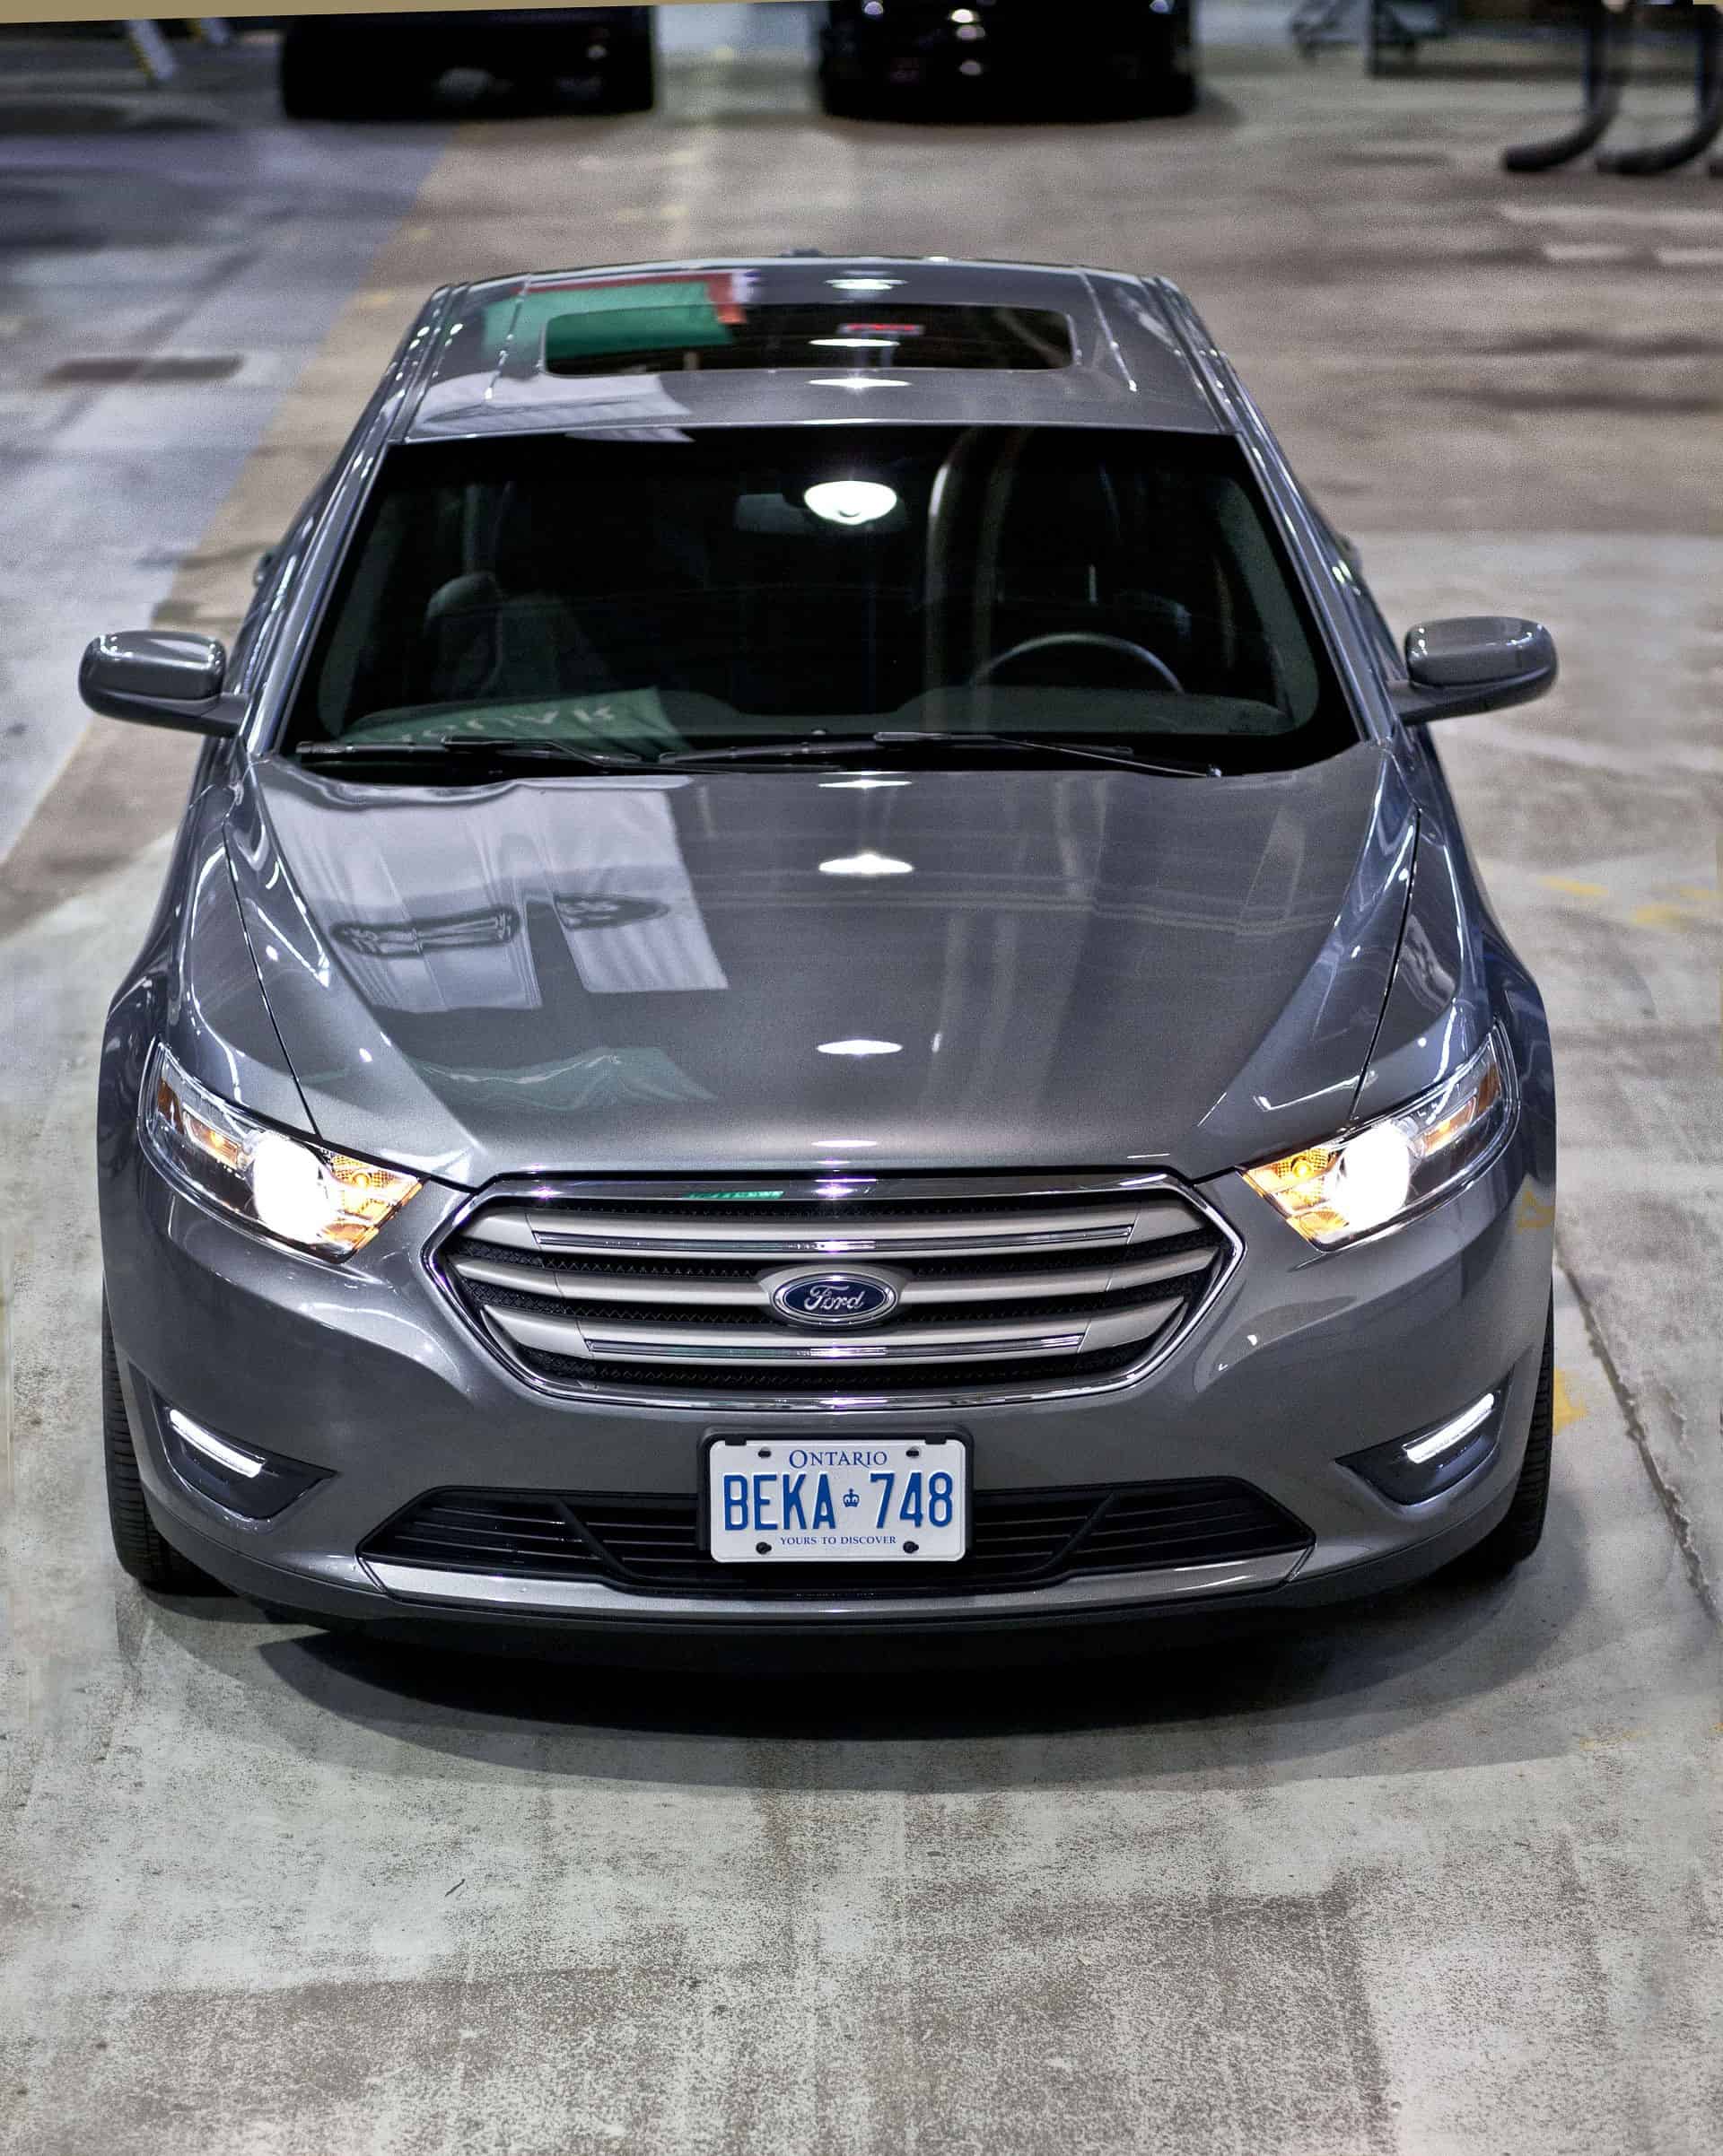 2013 Ford Taurus pictured from top